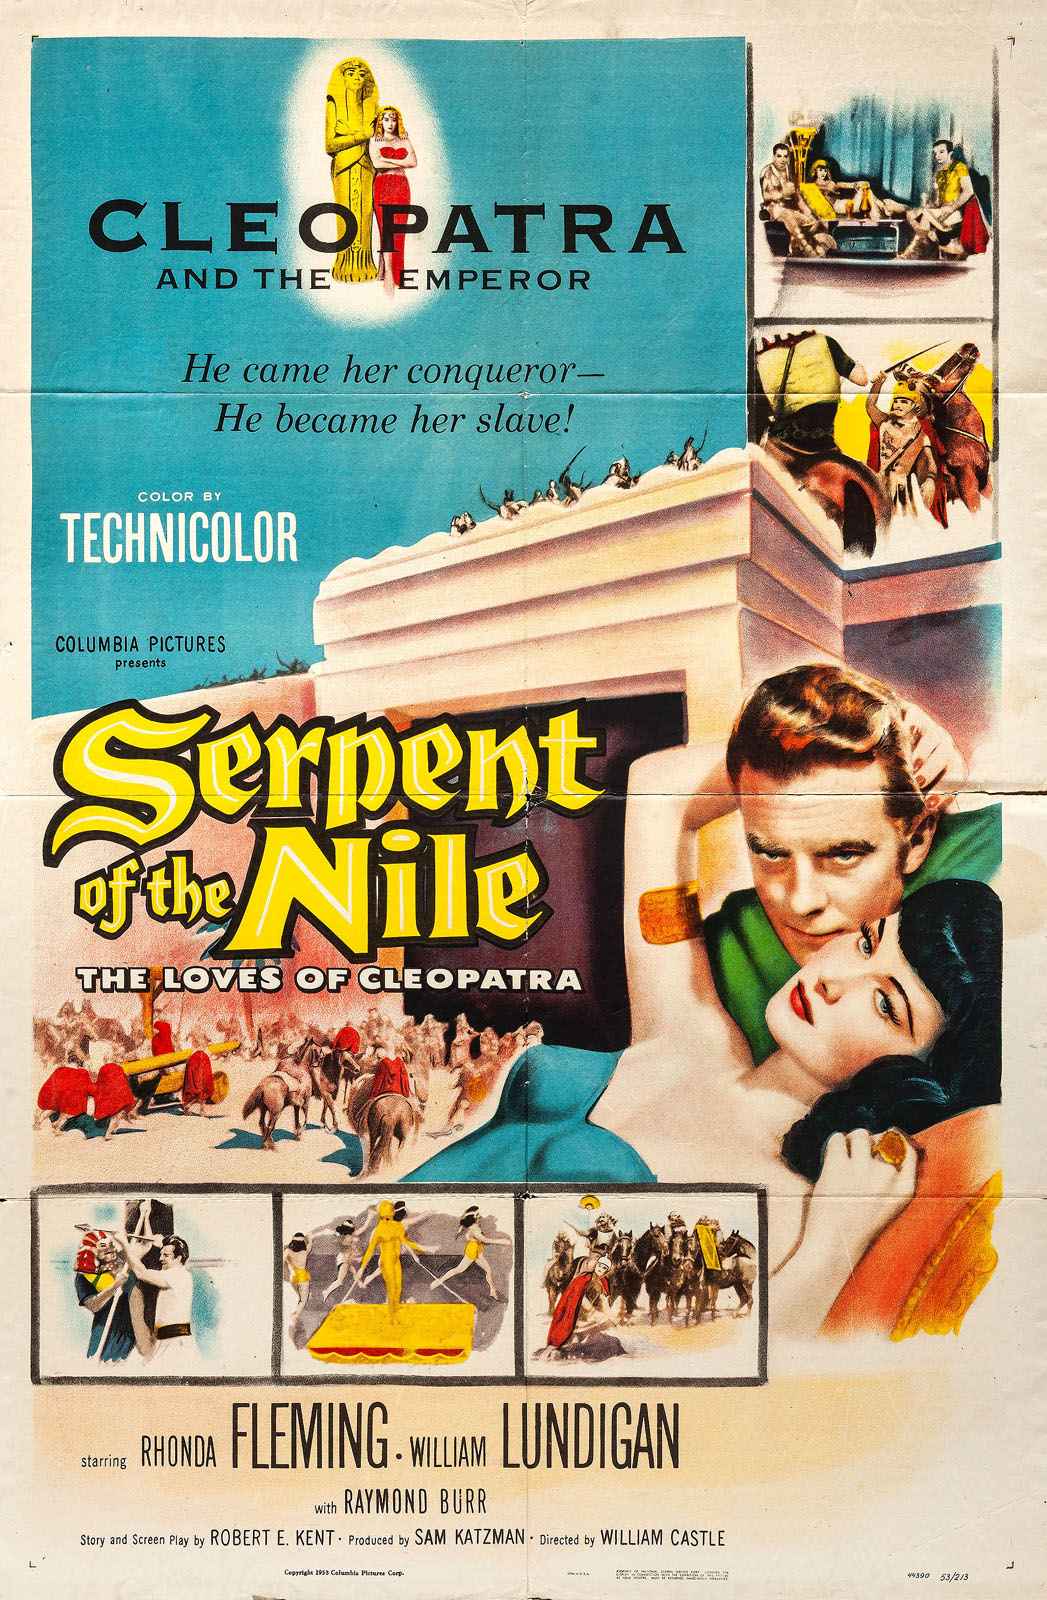 SERPENT OF THE NILE